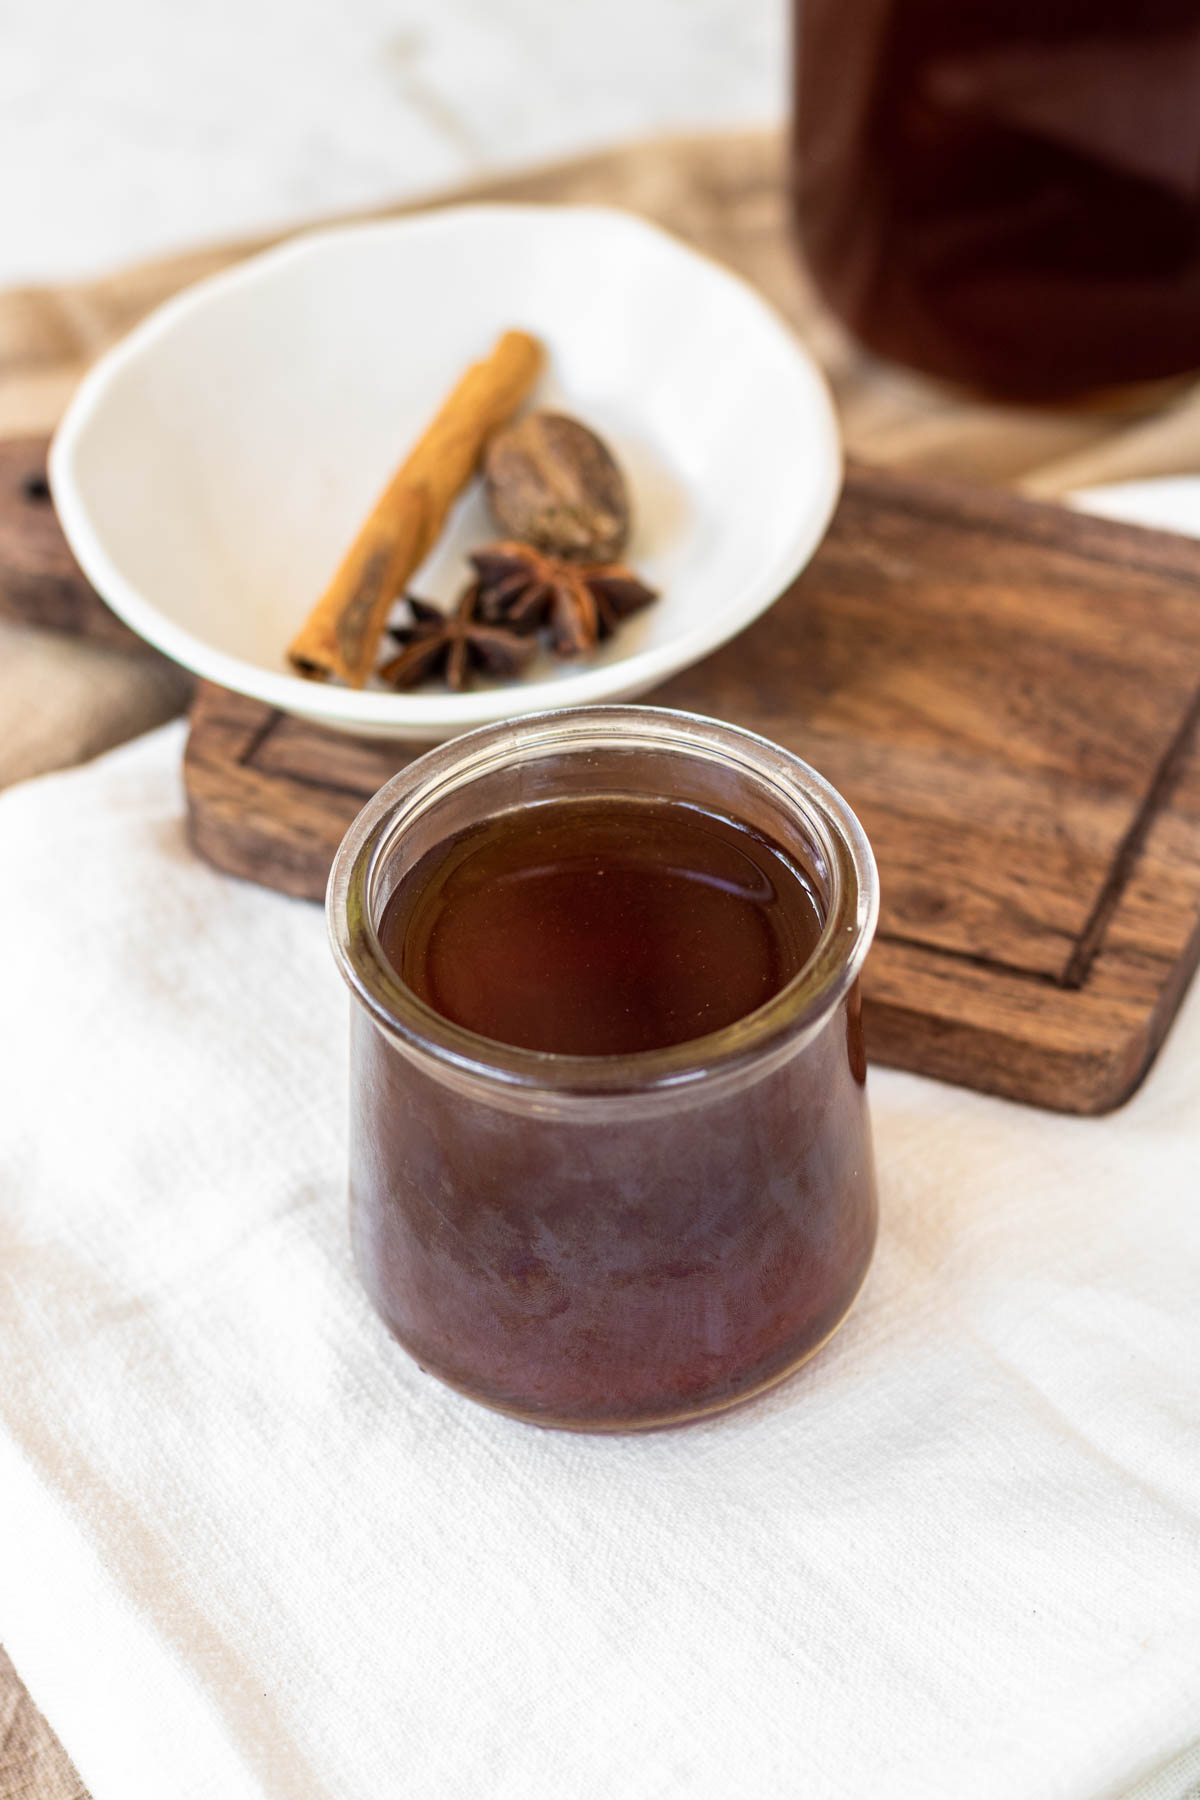 A cinnamon stick, nutmeg seed, and anise star in a bowl next to a glass of tea concentrate.